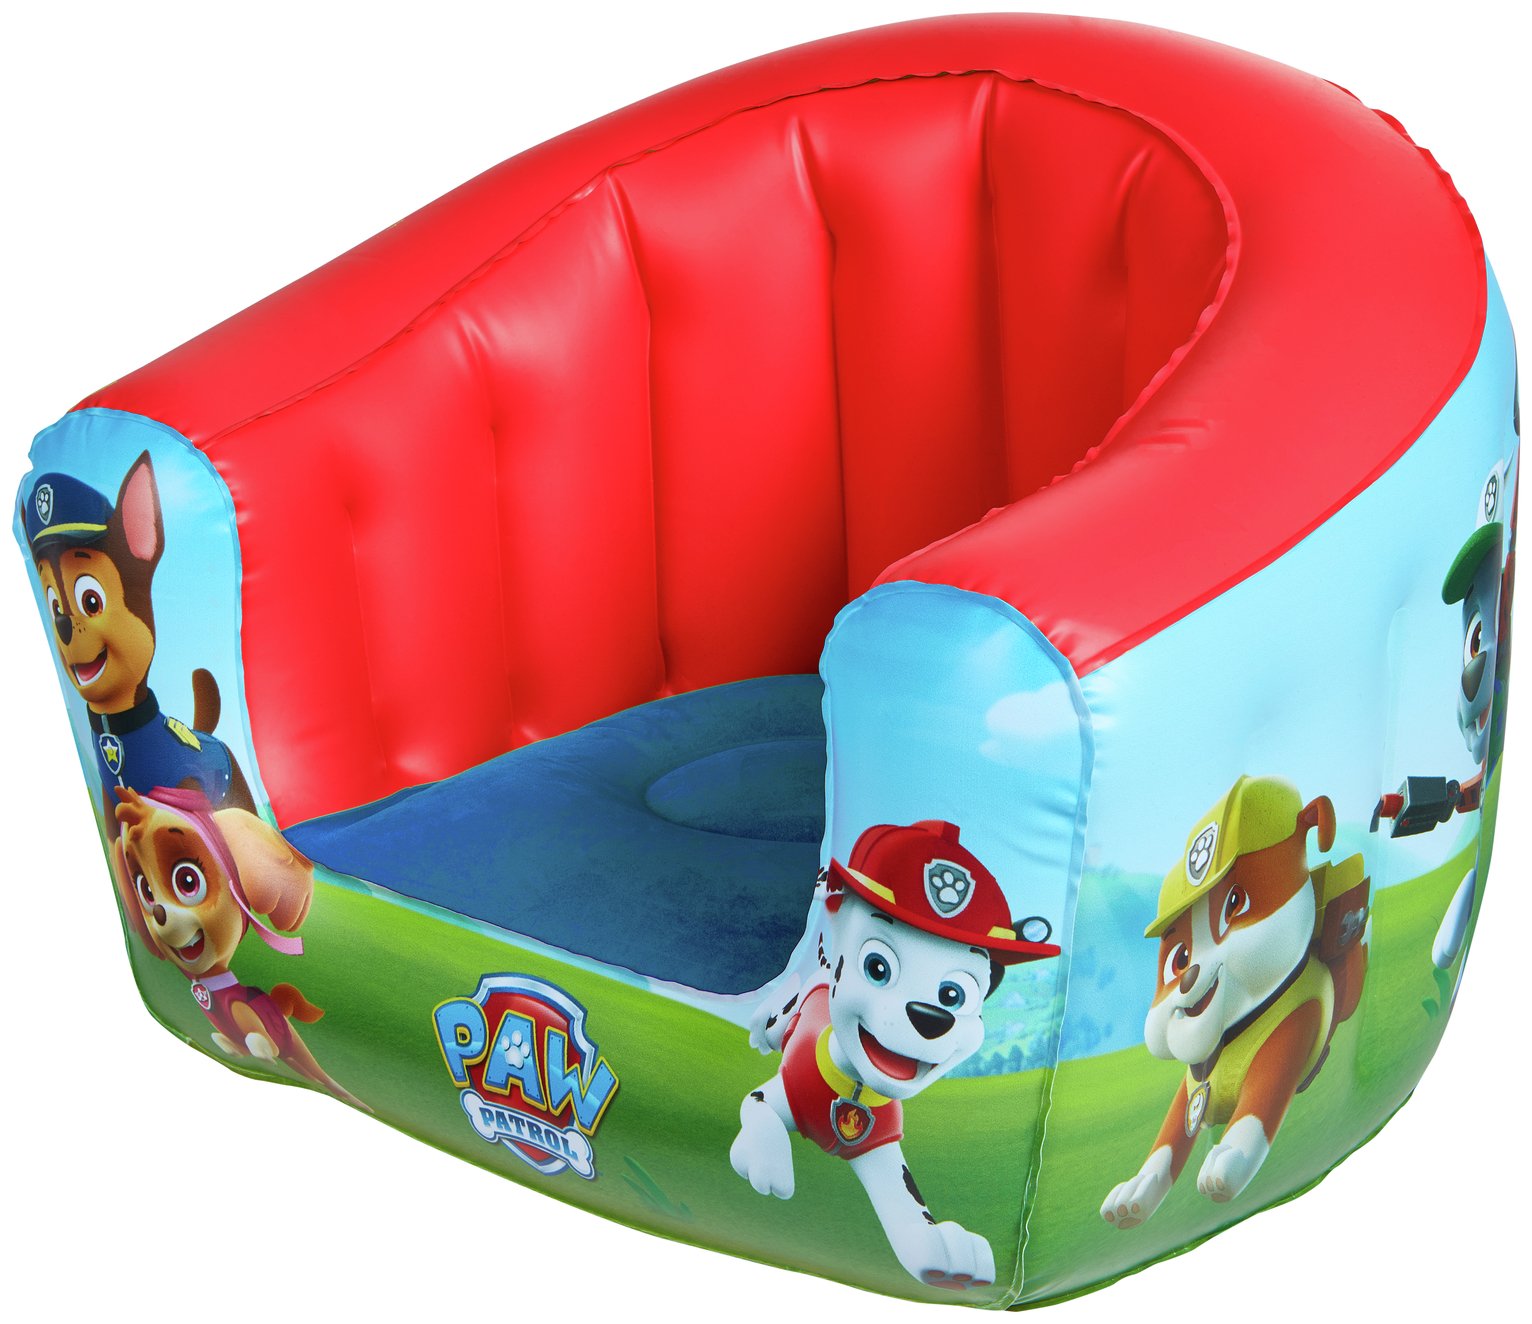 PAW Patrol Flocked Chair. Review